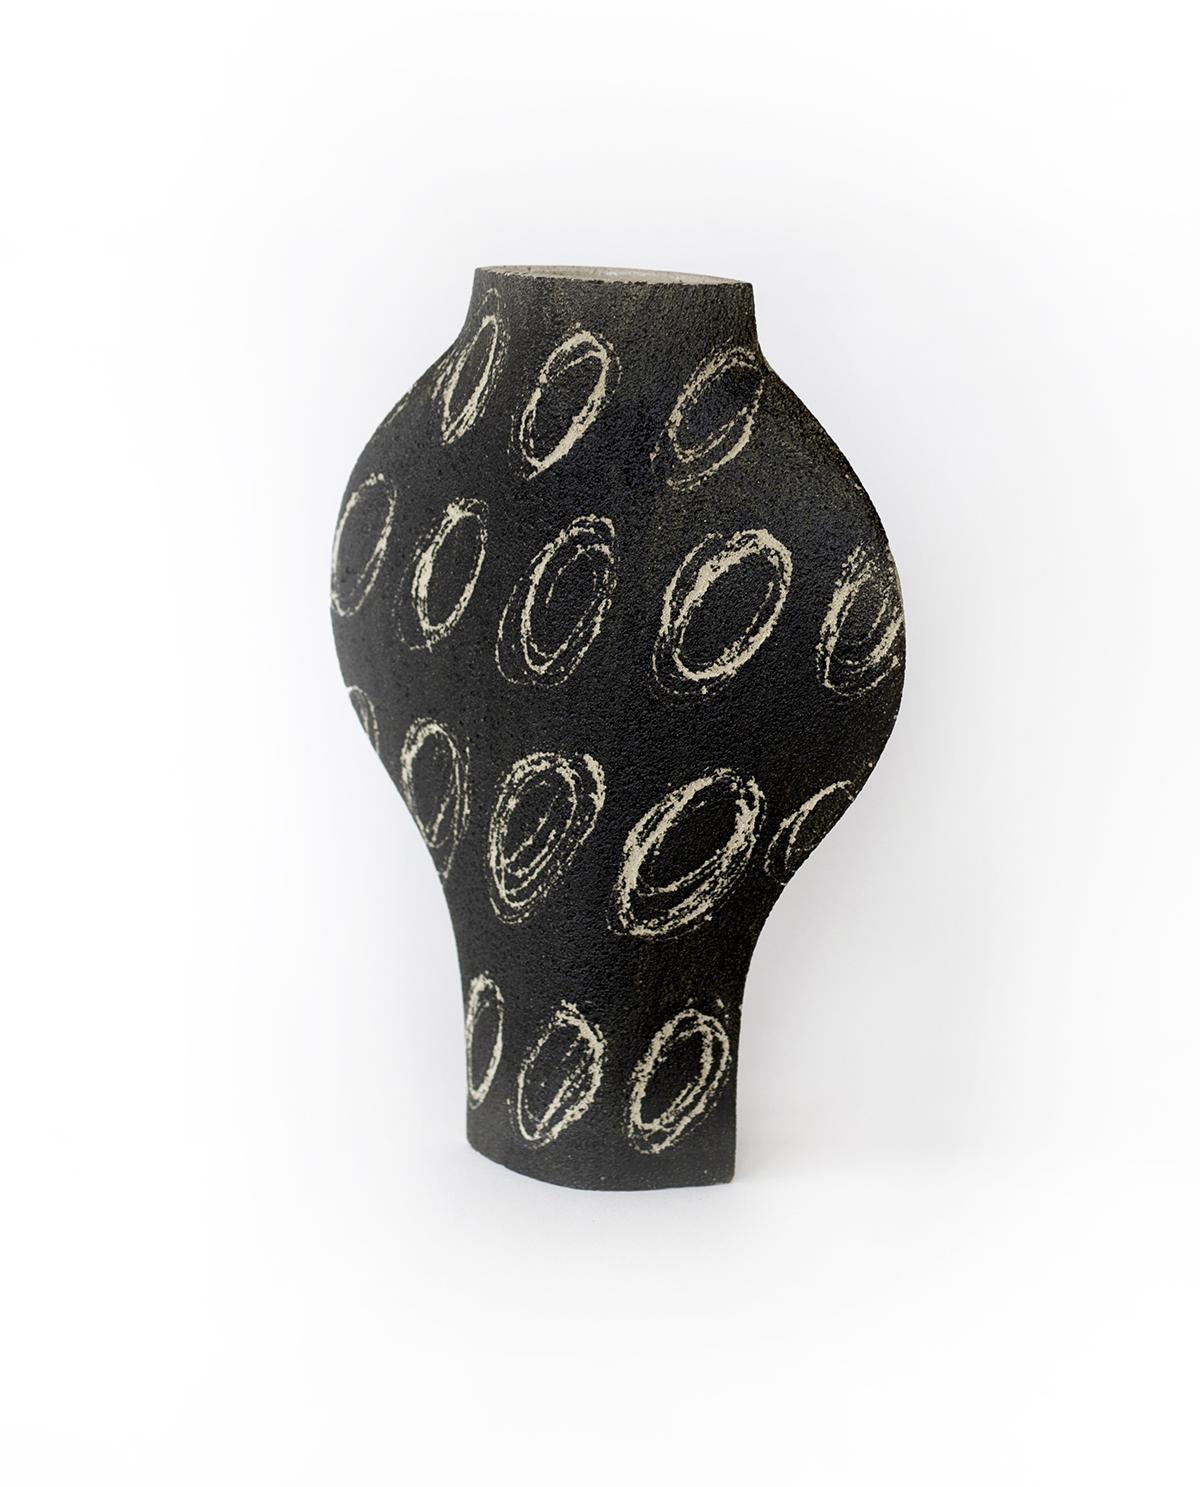 ‘Dal Negative Big Circles Black’ Ceramic Vase

This vase is part of a new series inspired by iconic Art (and more precisely paintings) movements. Here is our DAL model with motifs based on abstract paintings. The motifs are applied to the vase